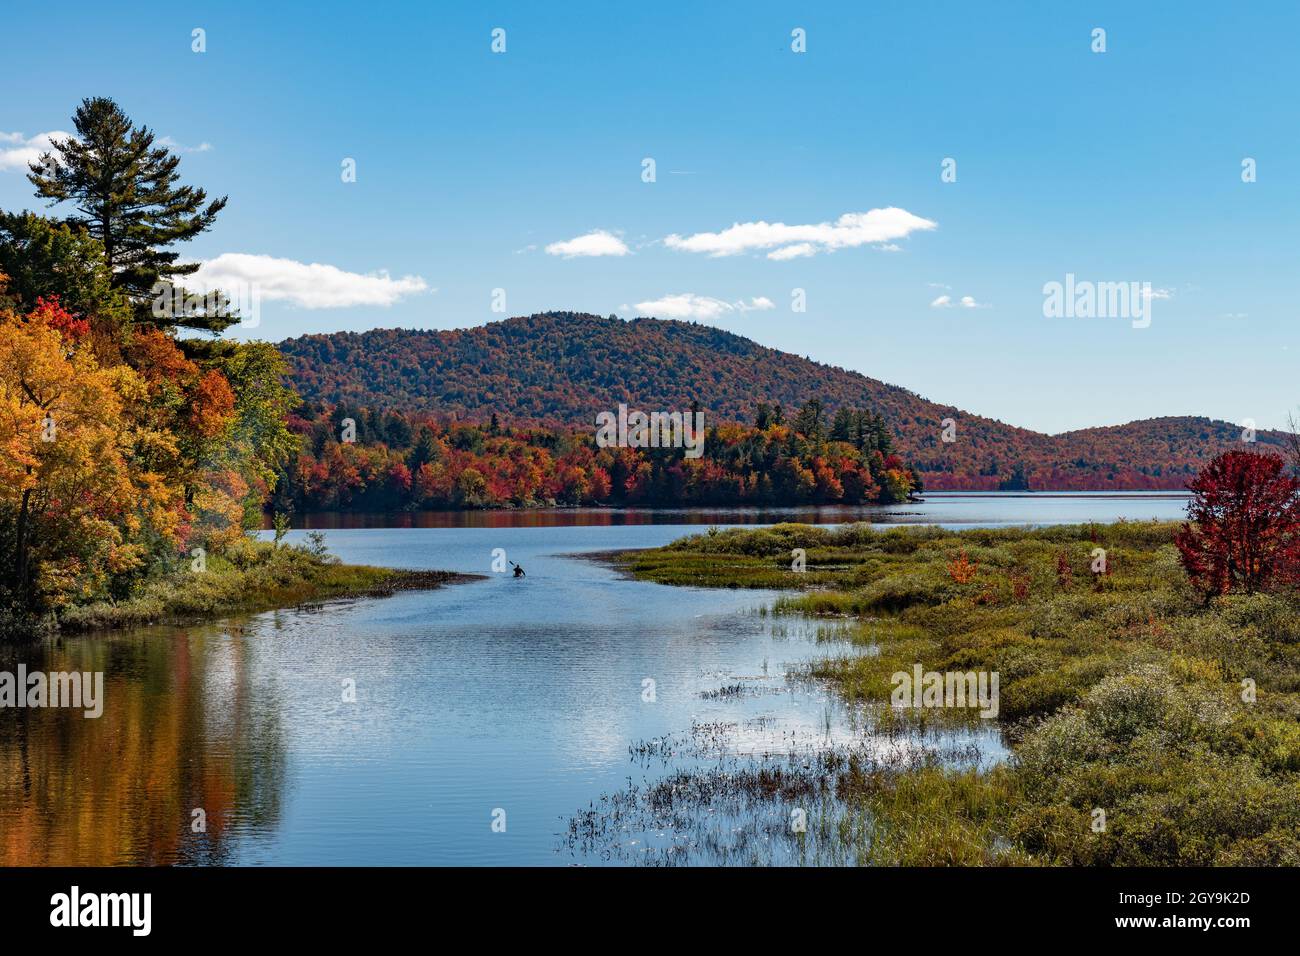 A view of a man paddling a canoe on Lewey Lake in the Adirondack Mountains, NY USA in autumn with fall colors on display Stock Photo